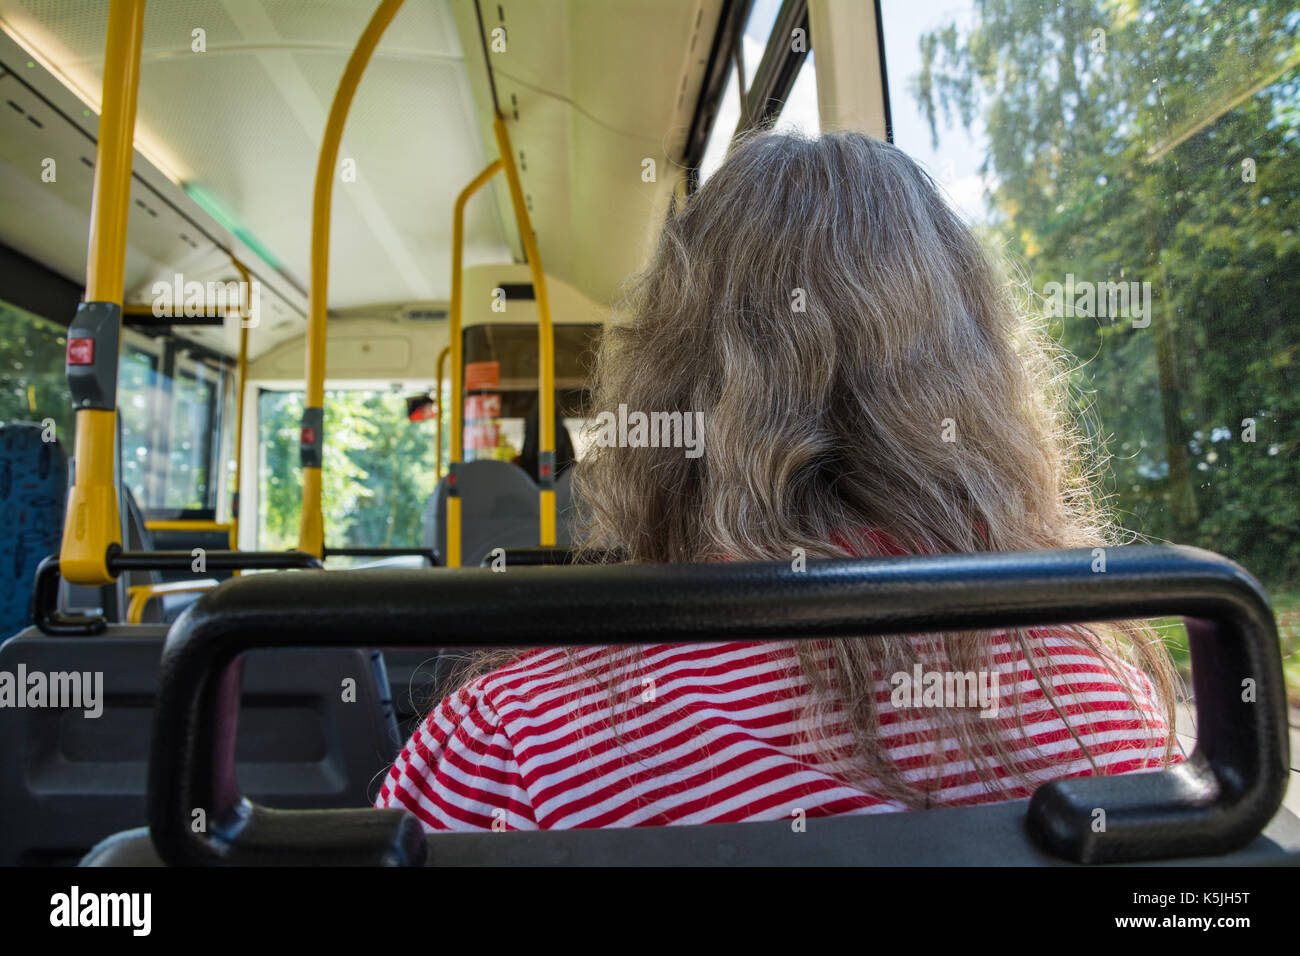 A candid image of an elderly woman on a bus (public transport) heading for Bridgnorth, Shropshire, UK. Stock Photo